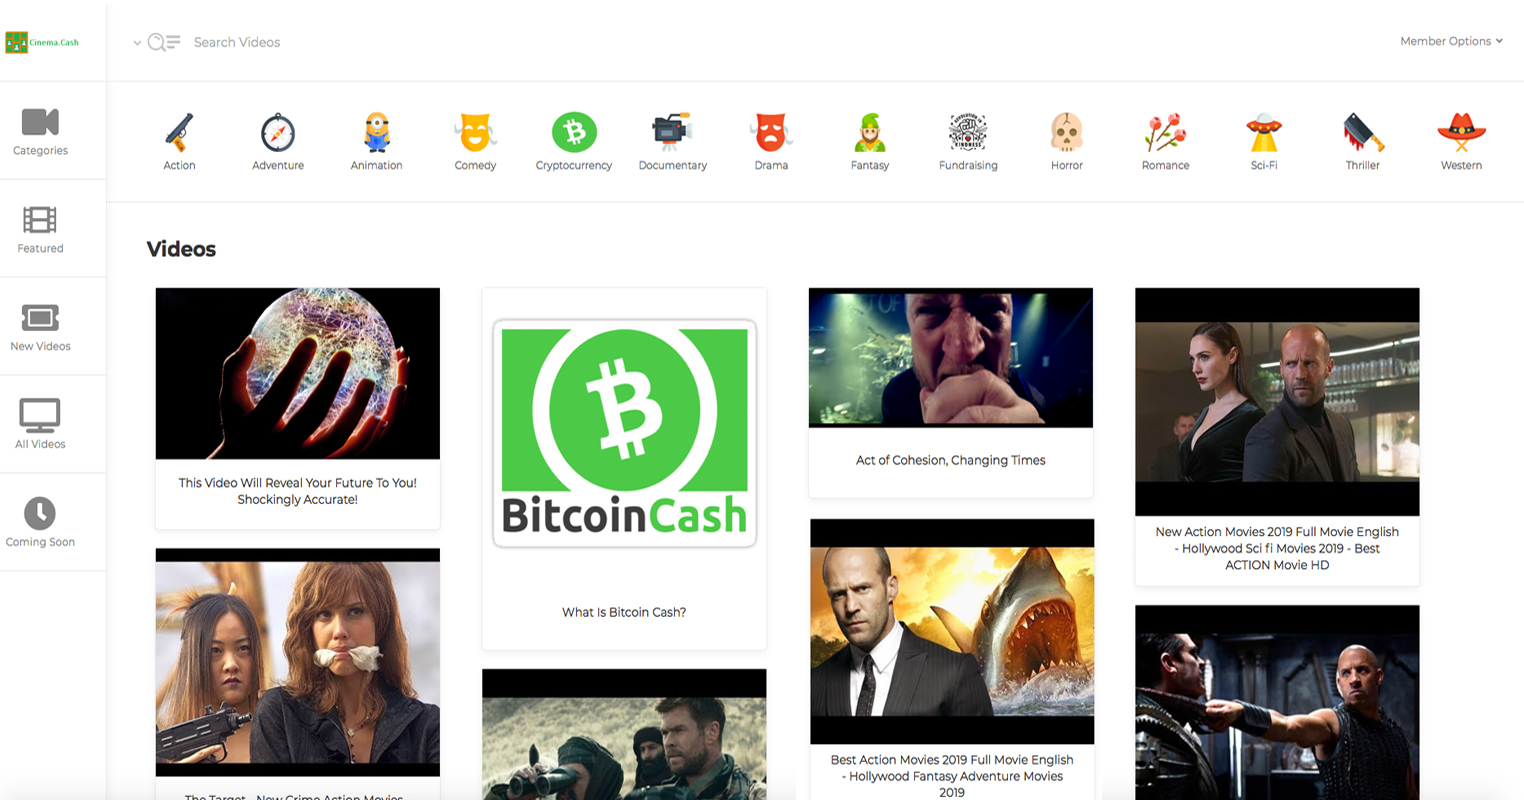 These Video Sharing Sites Pay Content Creators in Bitcoin Cash